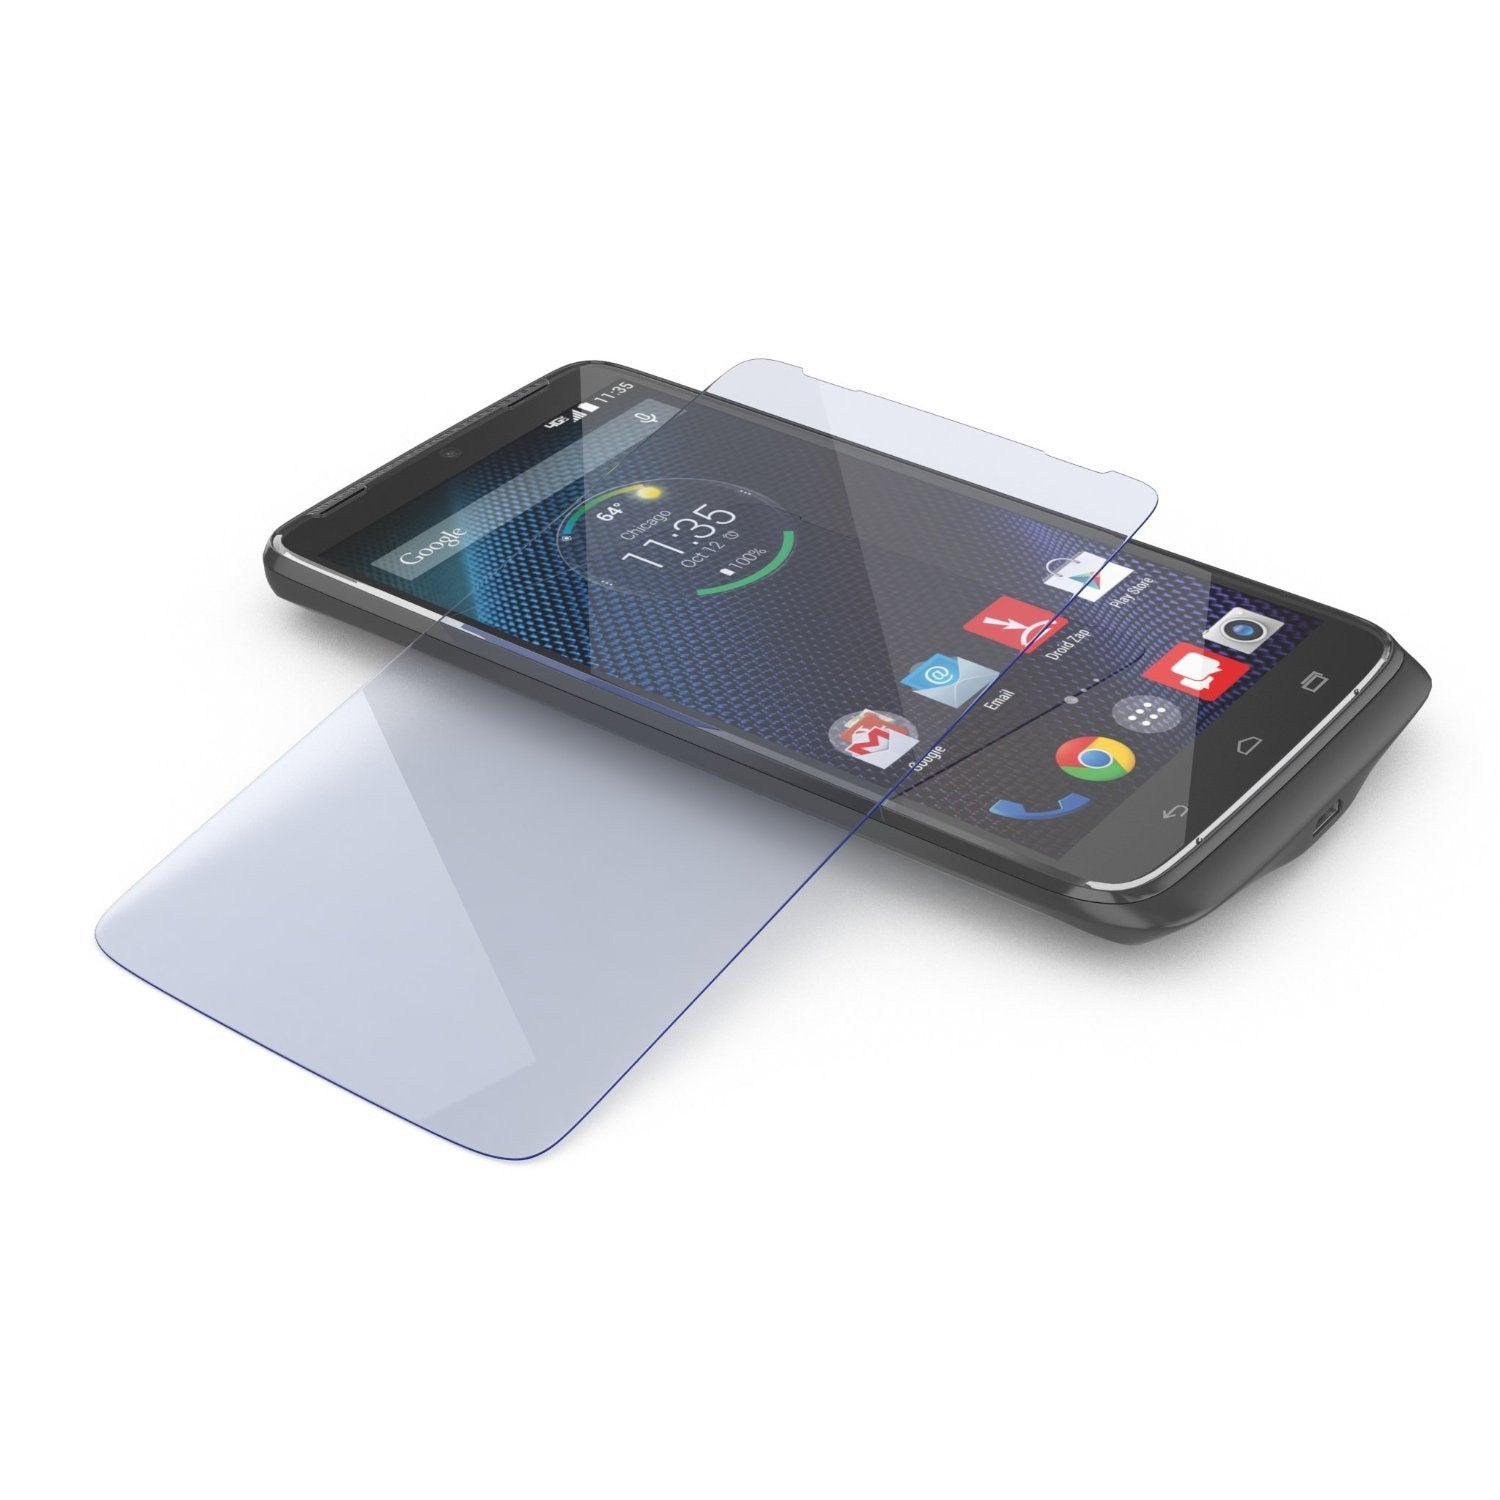 Motorola DROID TURBO Screen Protector, Ghostek Glass Armor Tempered Glass Protector 0.33mm Thick 9H - PunkCase NZ